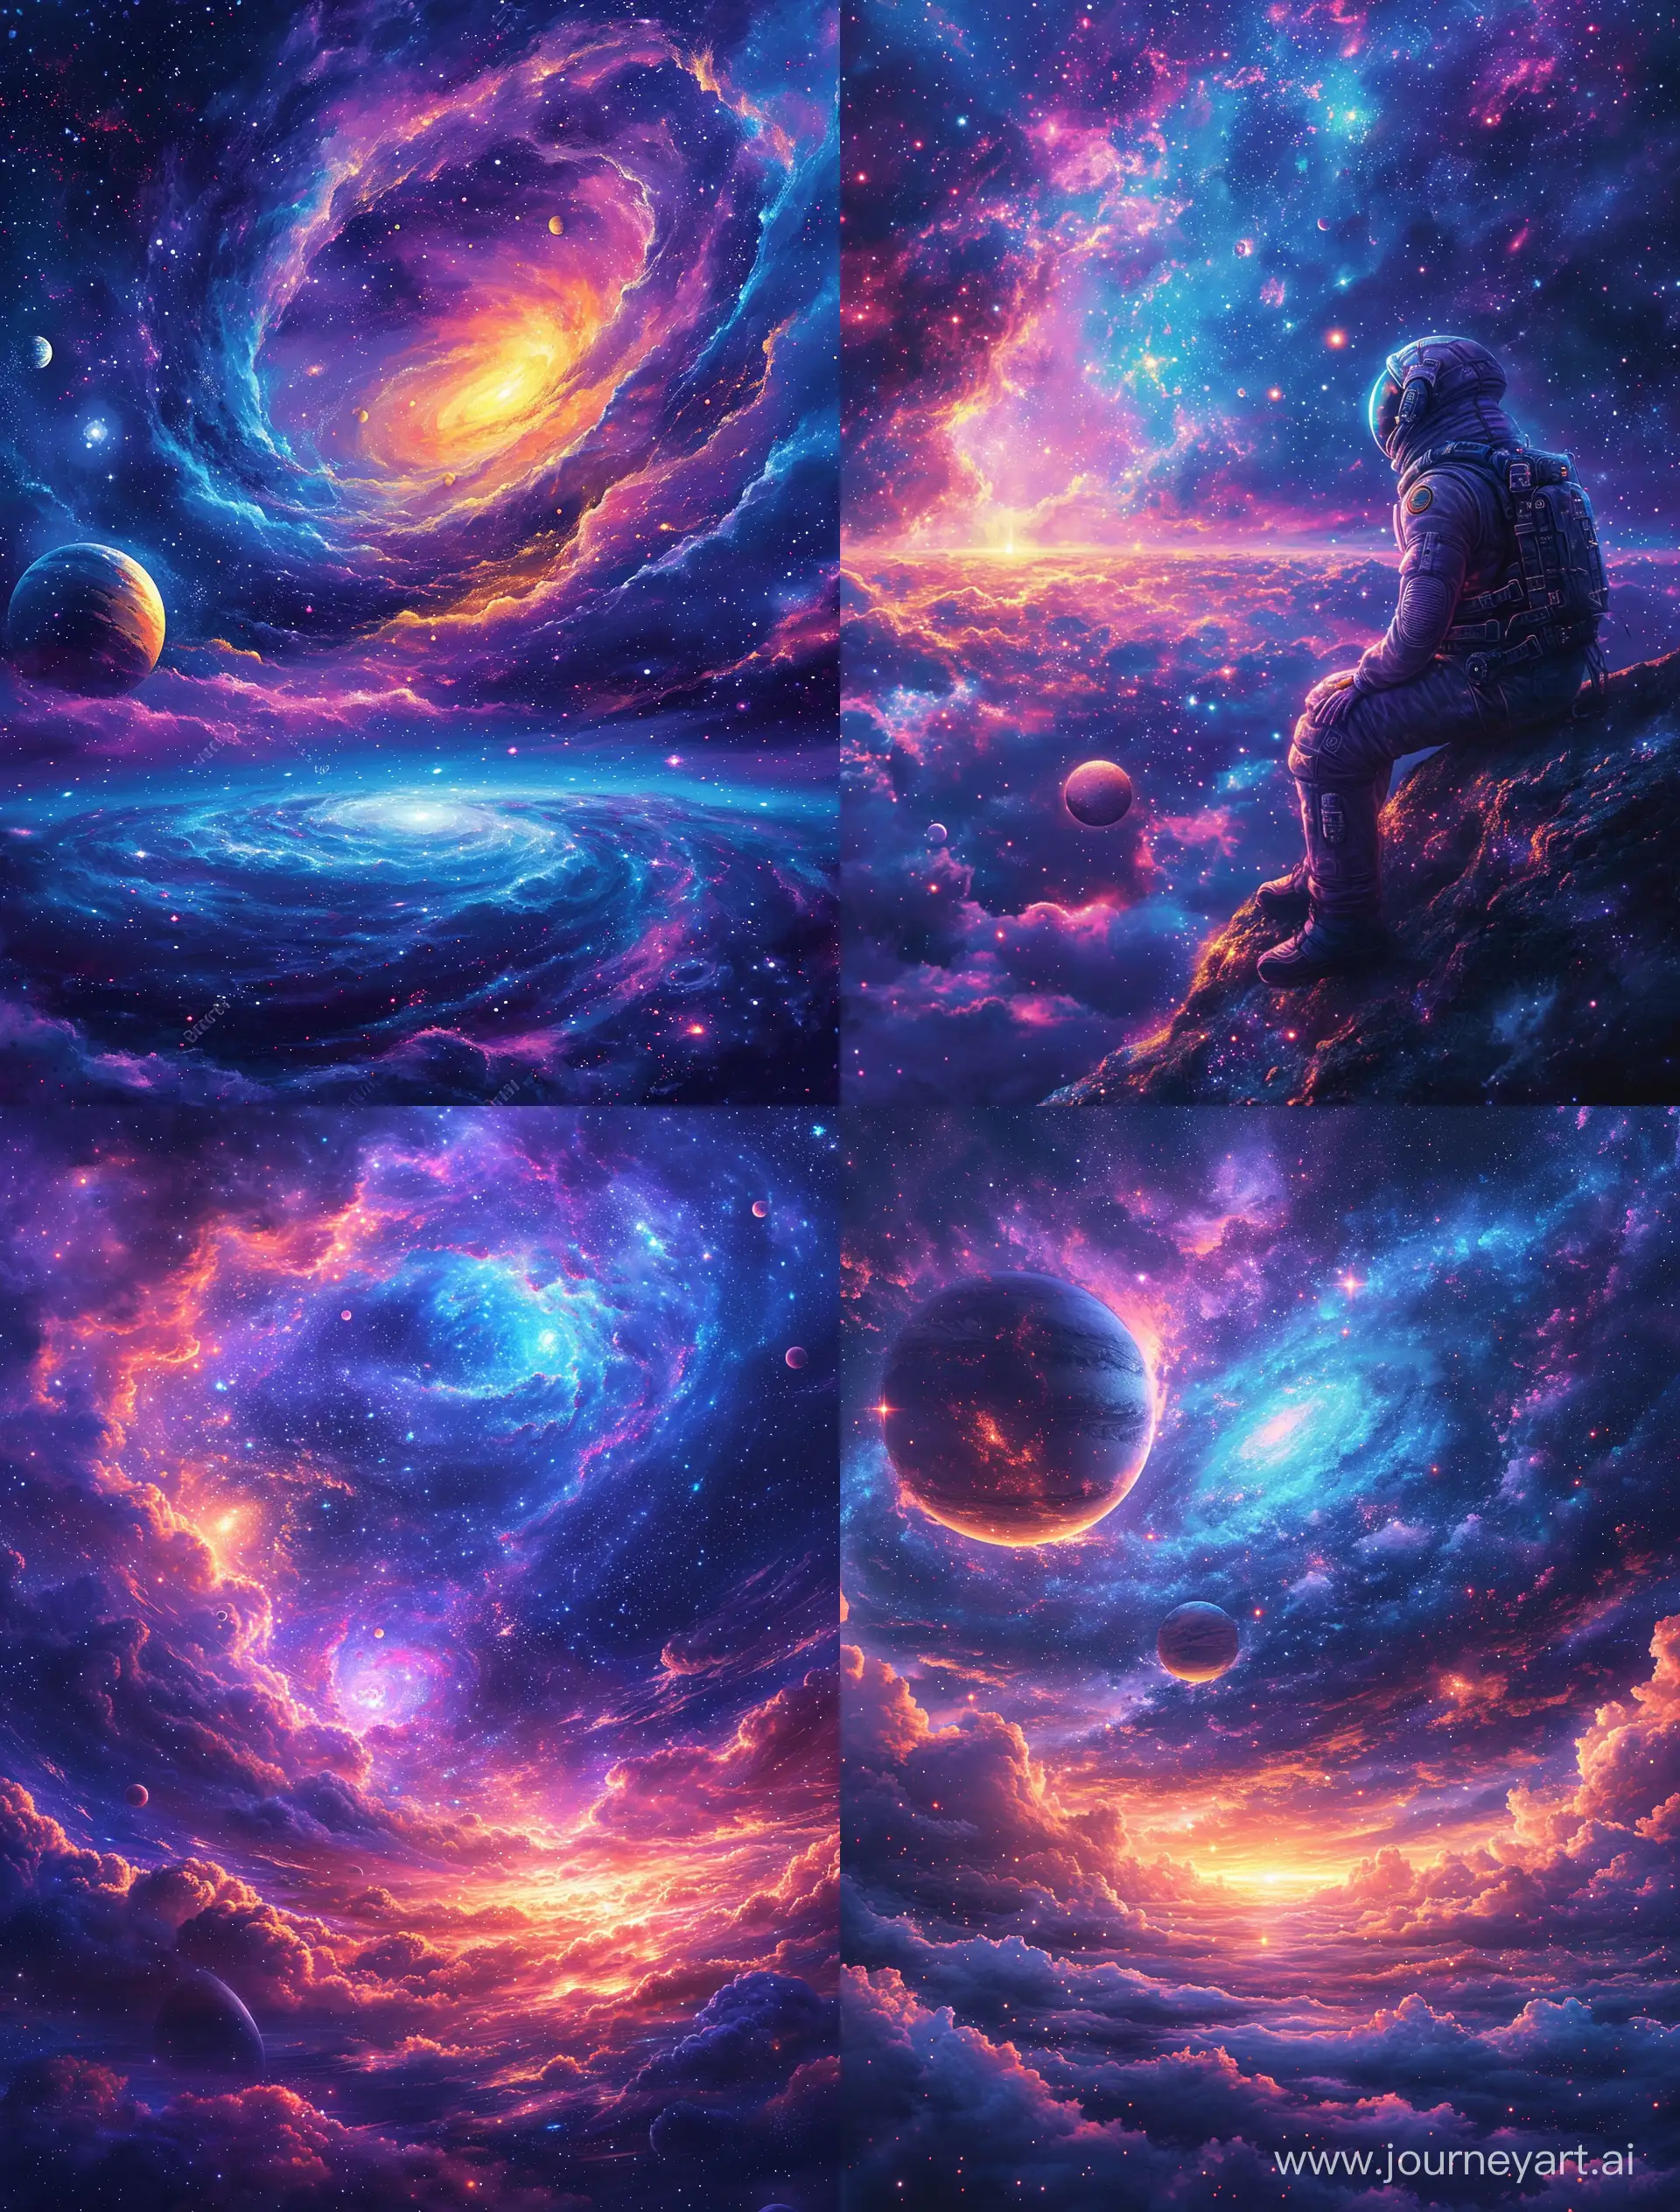 Create an image of a celestial sky with a galaxy theme, featuring swirling nebulas, twinkling stars, and distant planets in vibrant colors like purples, blues, and pinks. The design should capture the vastness and beauty of space --ar 71:93 --stylize 750 --v 6